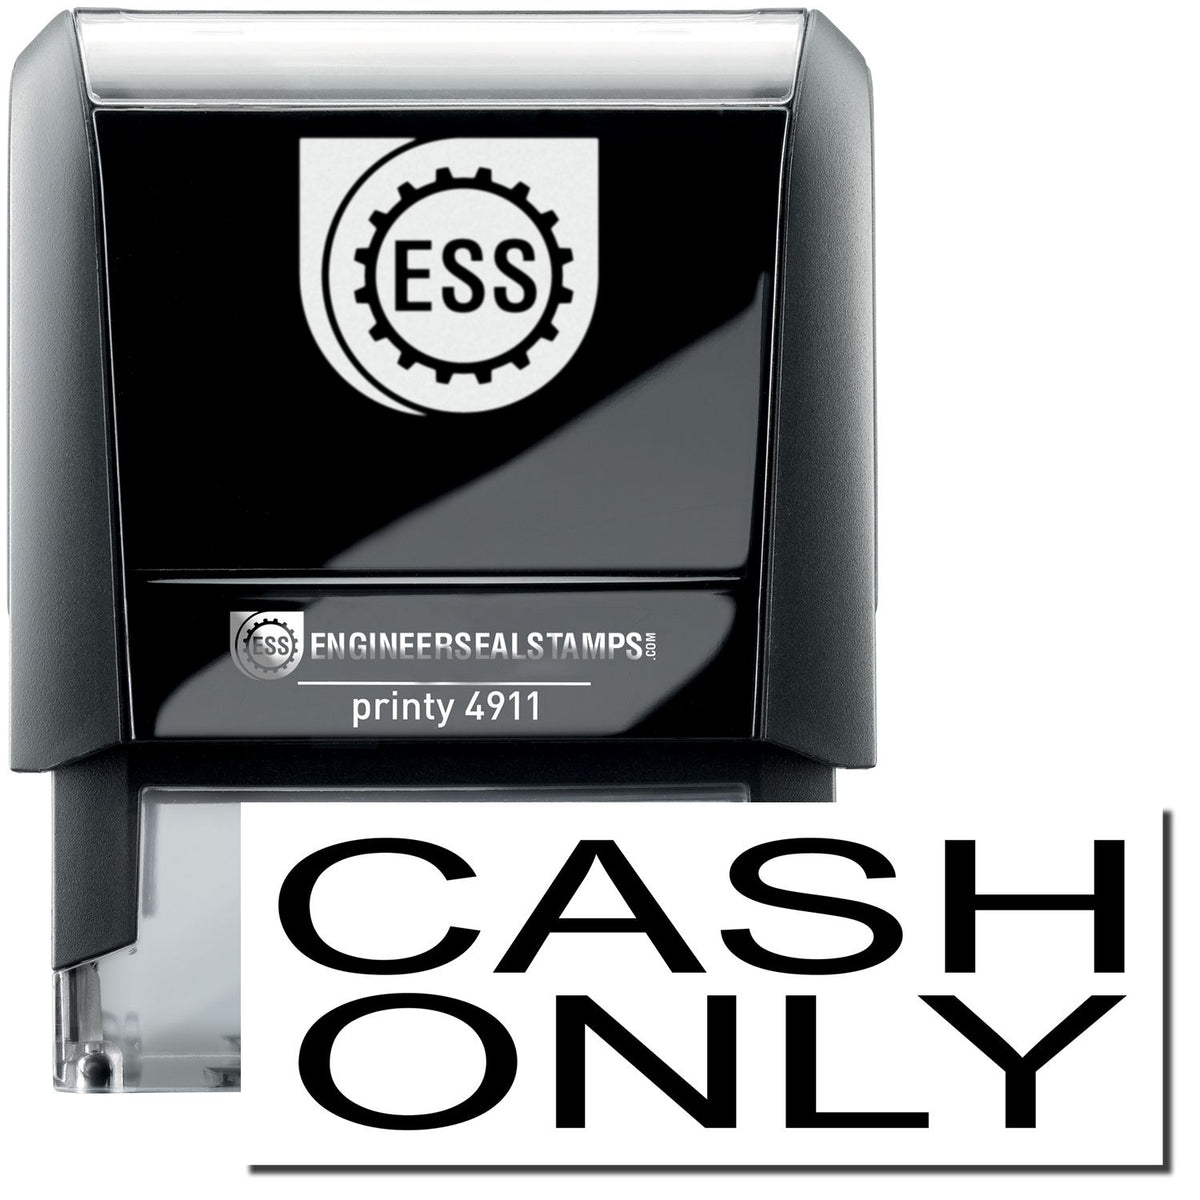 A self-inking stamp with a stamped image showing how the text &quot;CASH ONLY&quot; is displayed after stamping.